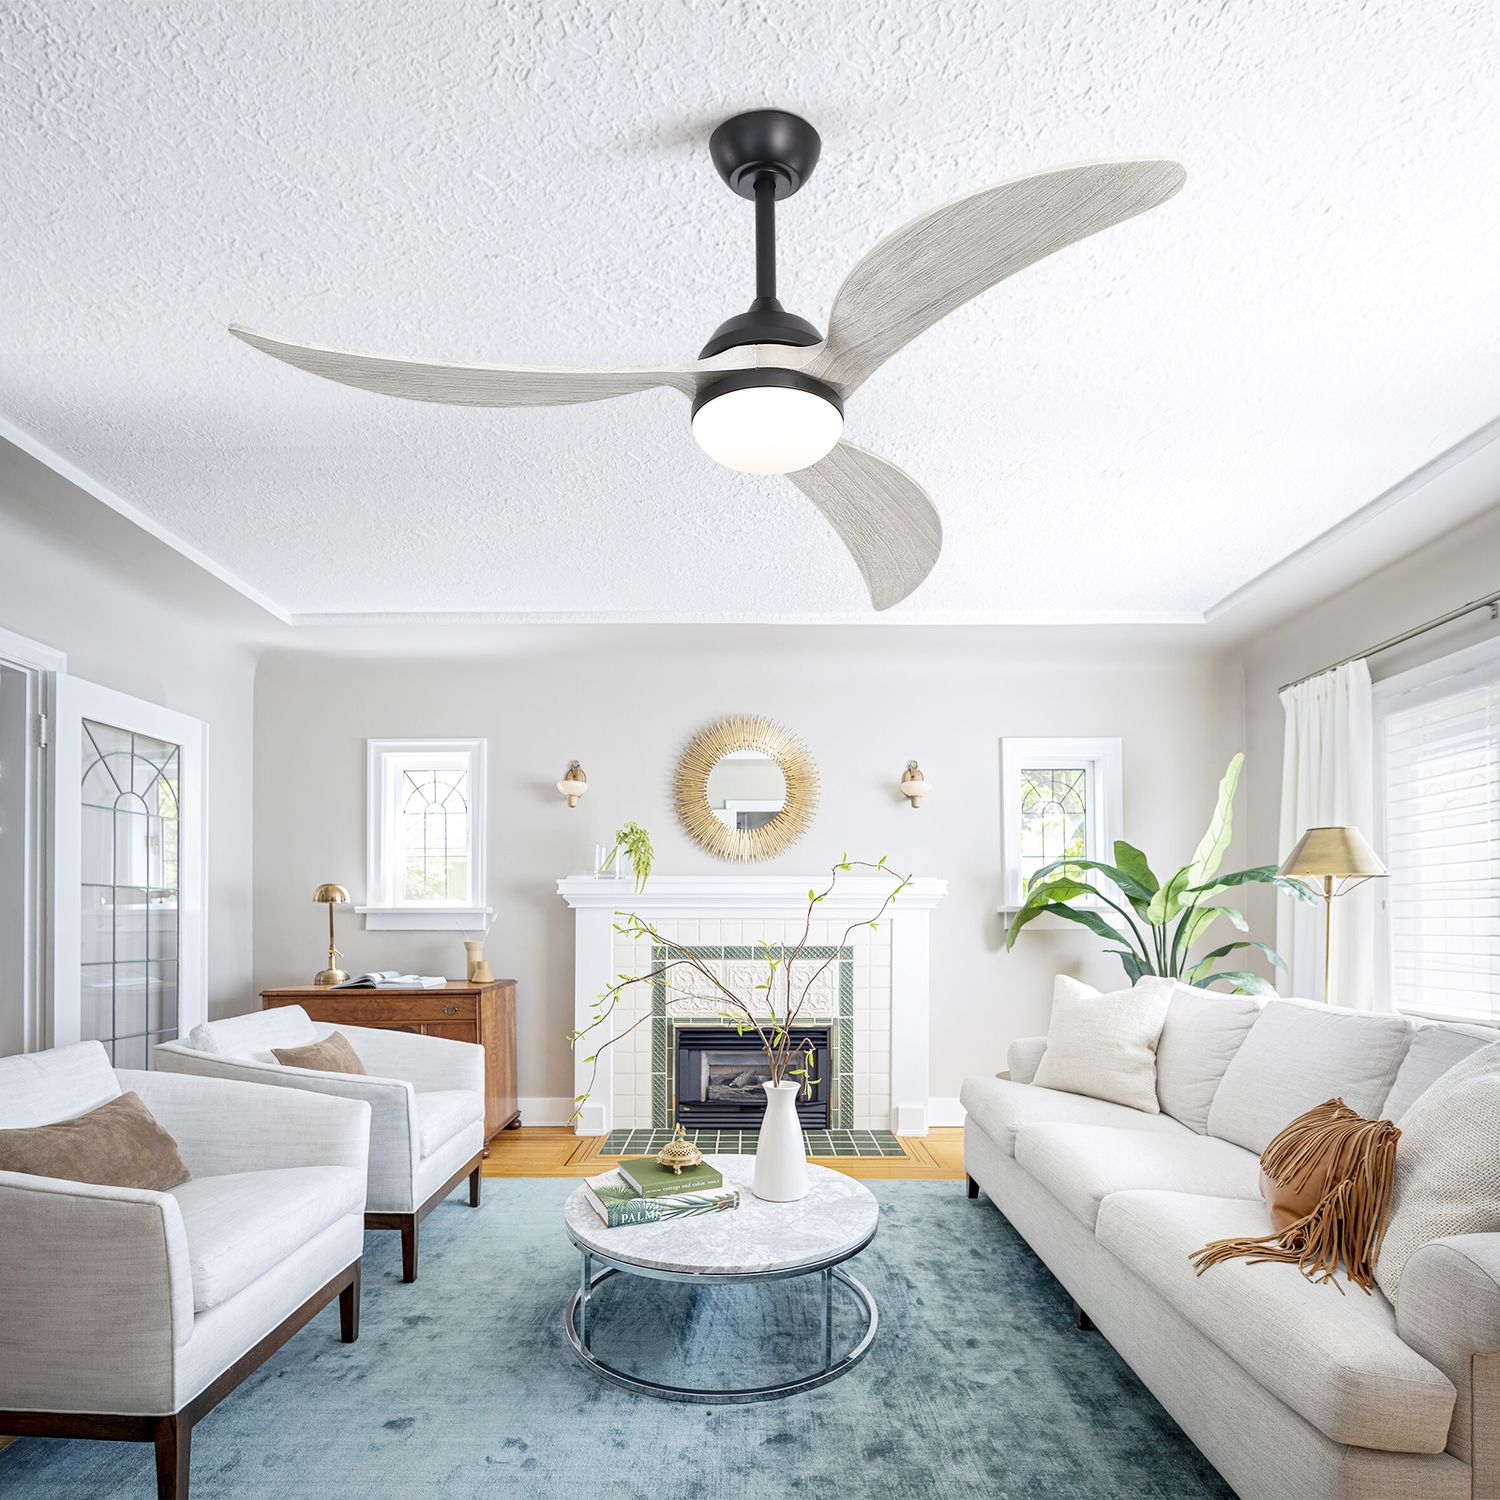 3 Blade Wood Ceiling Fan with Light in living room